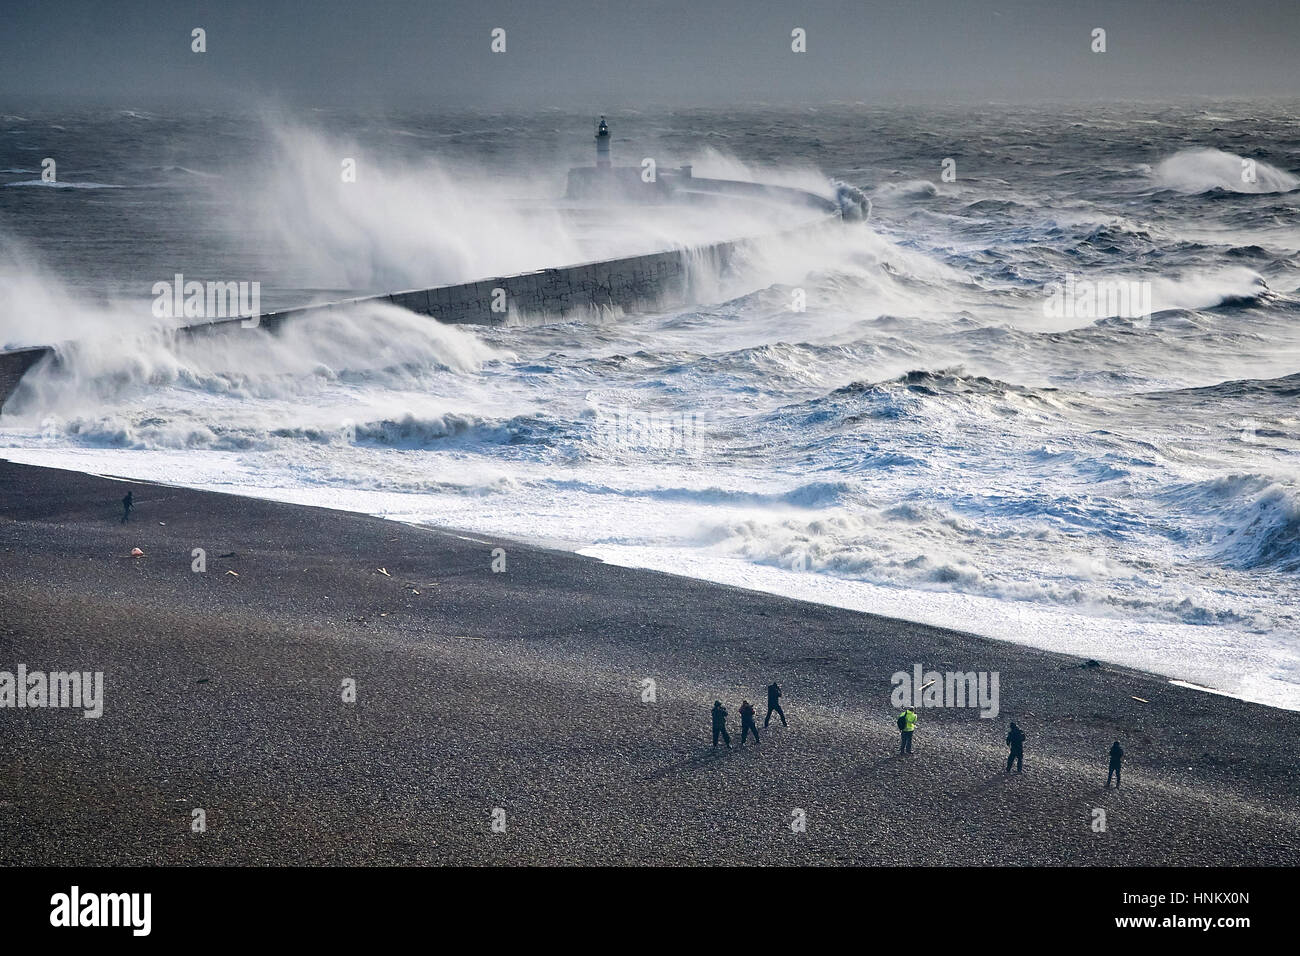 People watch from a beach as huge waves crash over a sea wall near a lighthouse during a storm Stock Photo